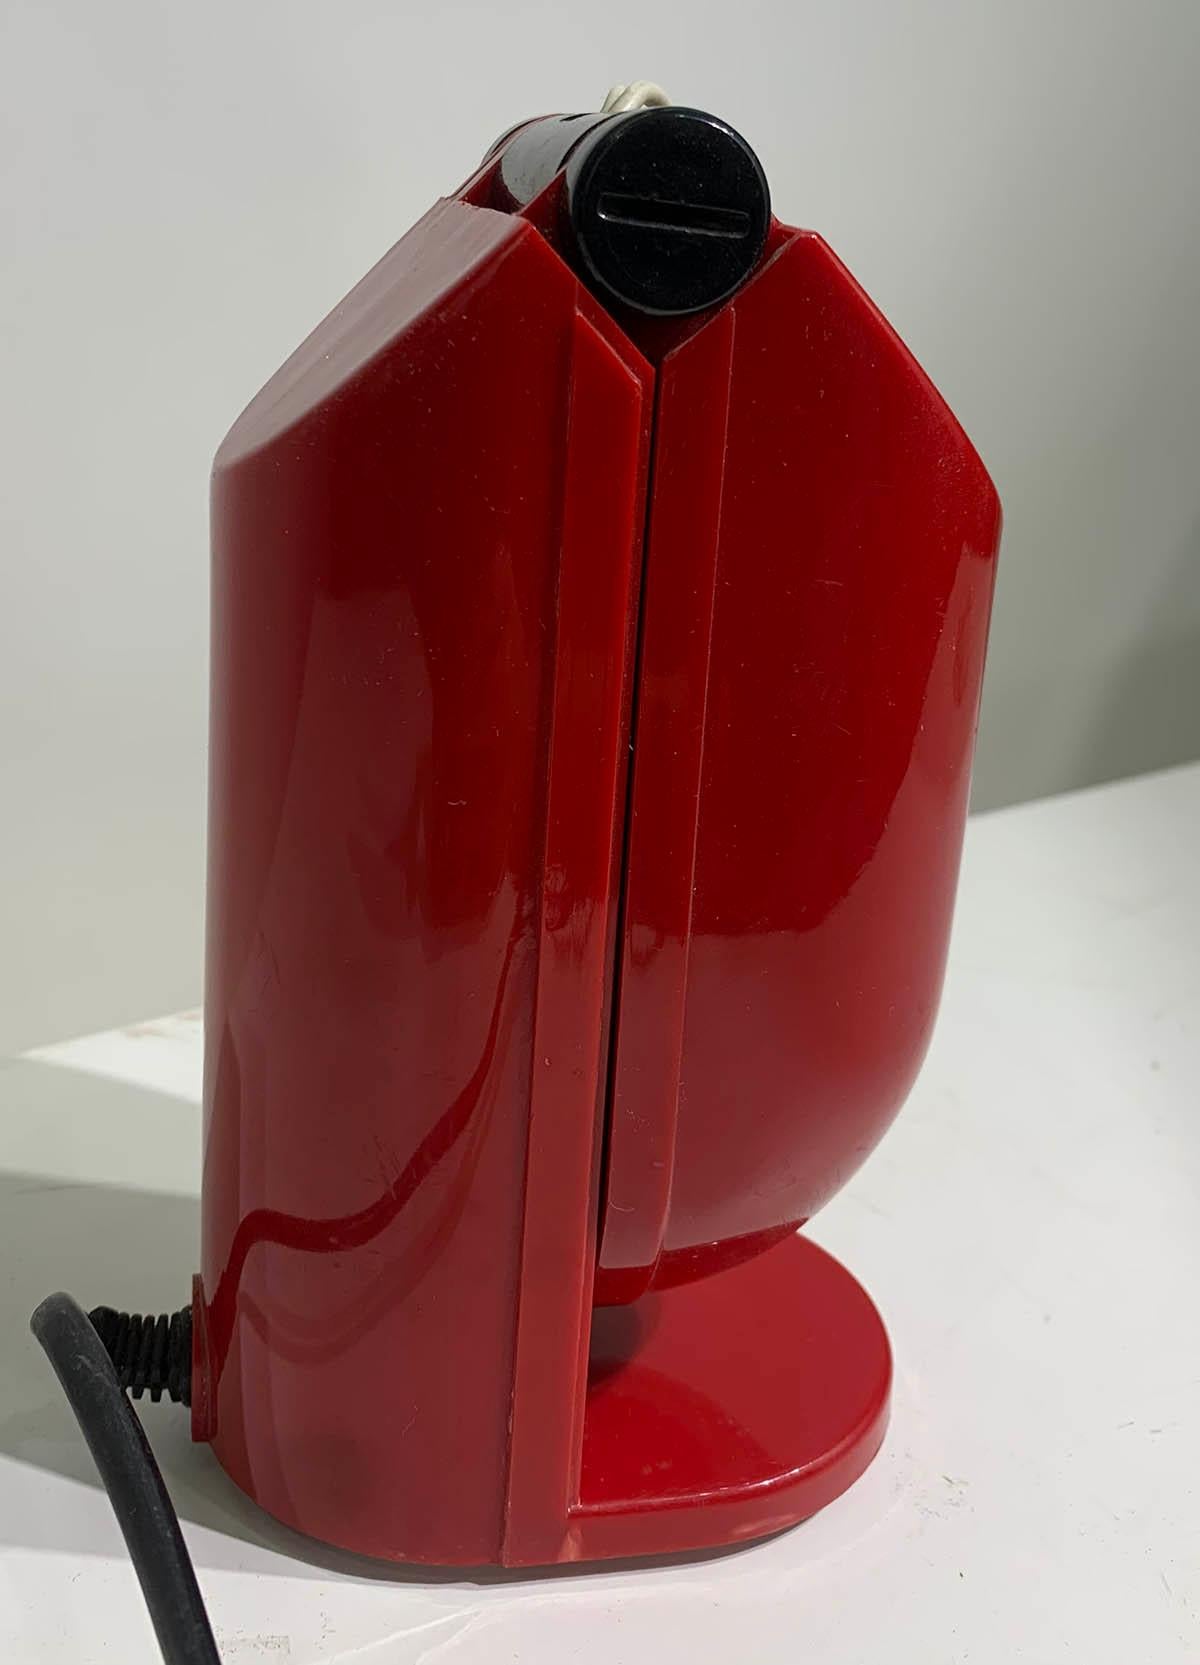 The 1970s gorgeous red modulable manon table lamp is designed by Japanese manufacturer Yamada Shomei Lighting.
The switch is inside the folding arm, the lamp is lit when the arm is 45 degrees opened.
So The light turns on when you open the lamp